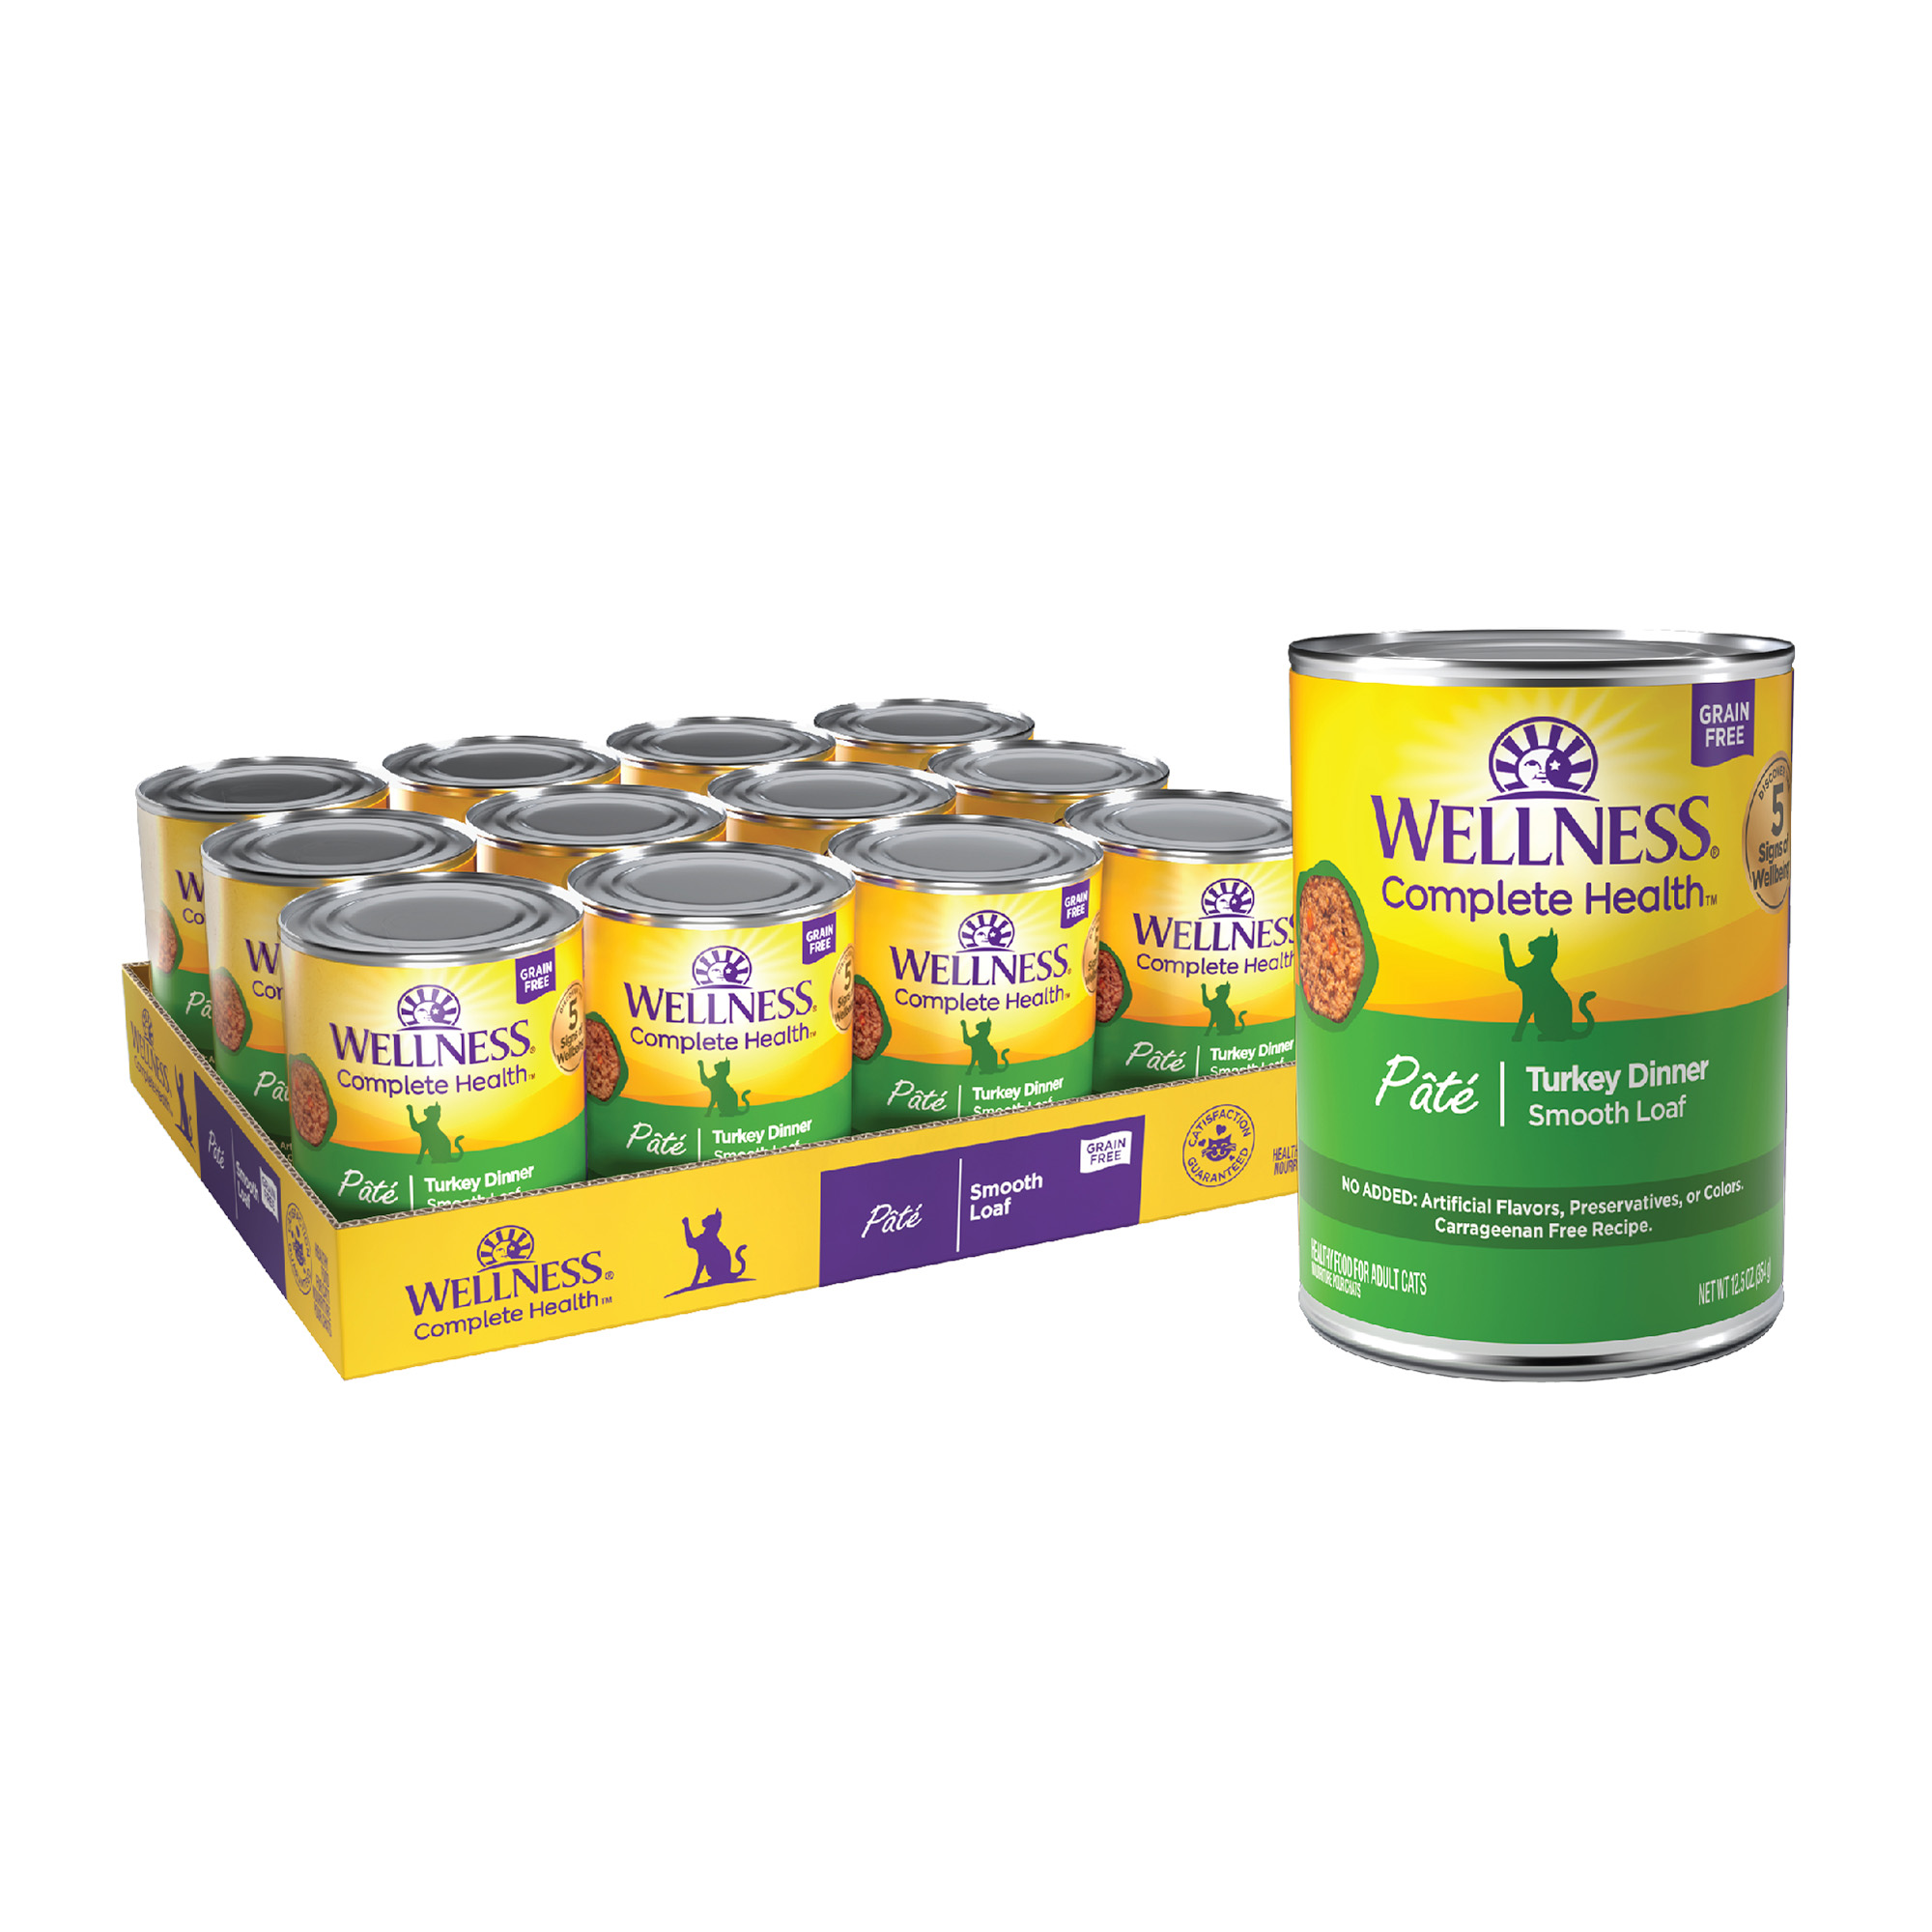 Wellness Complete Health Grain Free Canned Cat Food, Turkey Dinner Pate, 12.5 Ounces (Pack of 12) - image 1 of 9